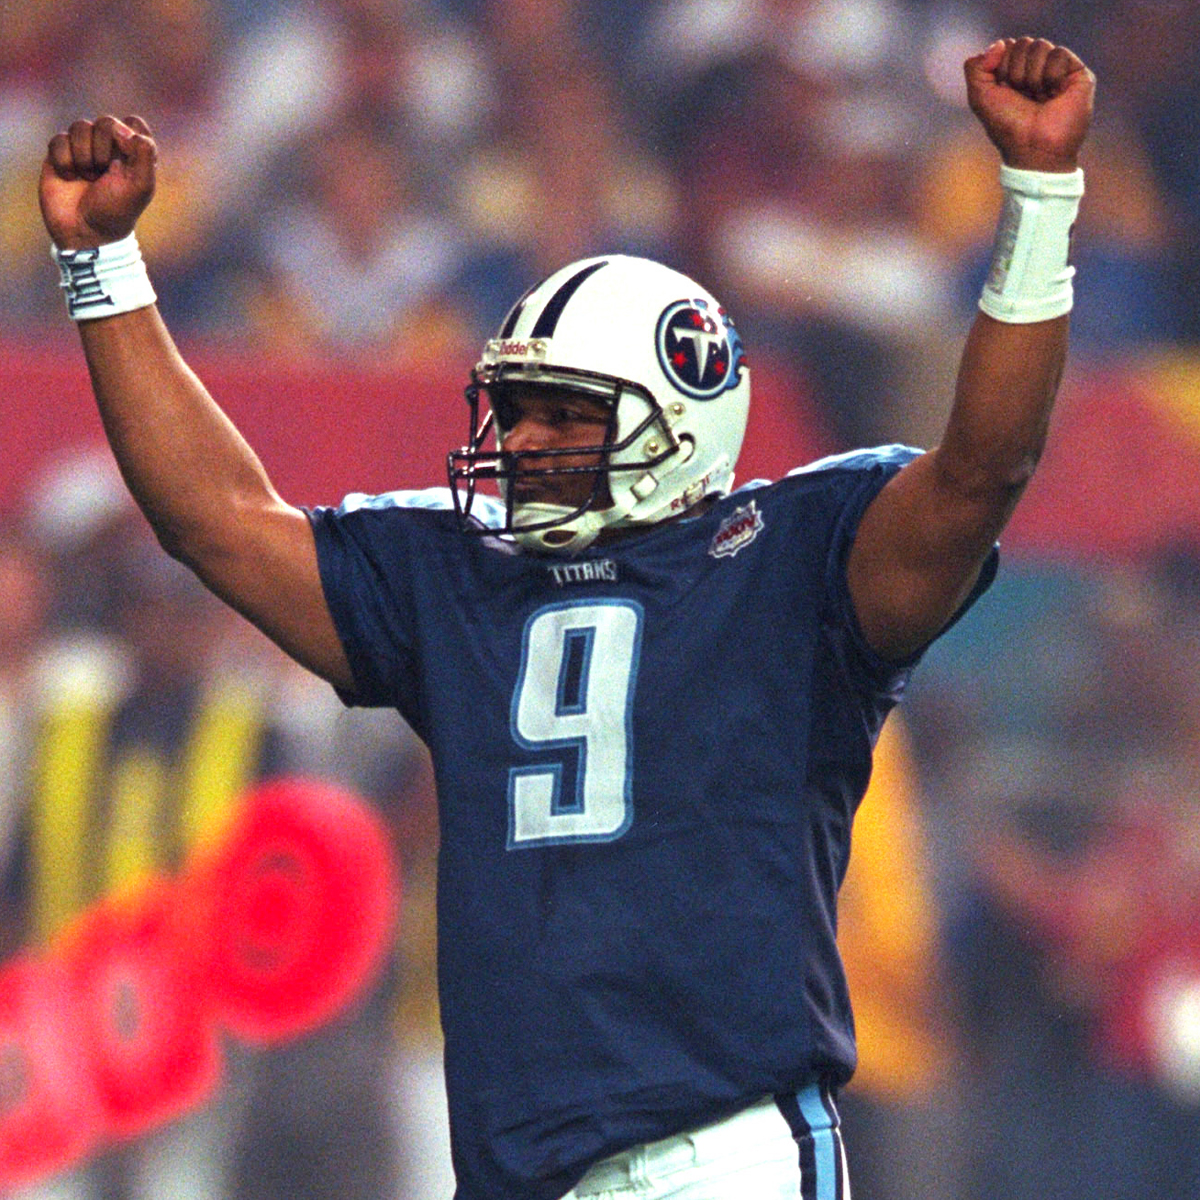 Steve McNair would have turned 47 today.

Happy birthday to a legend. 